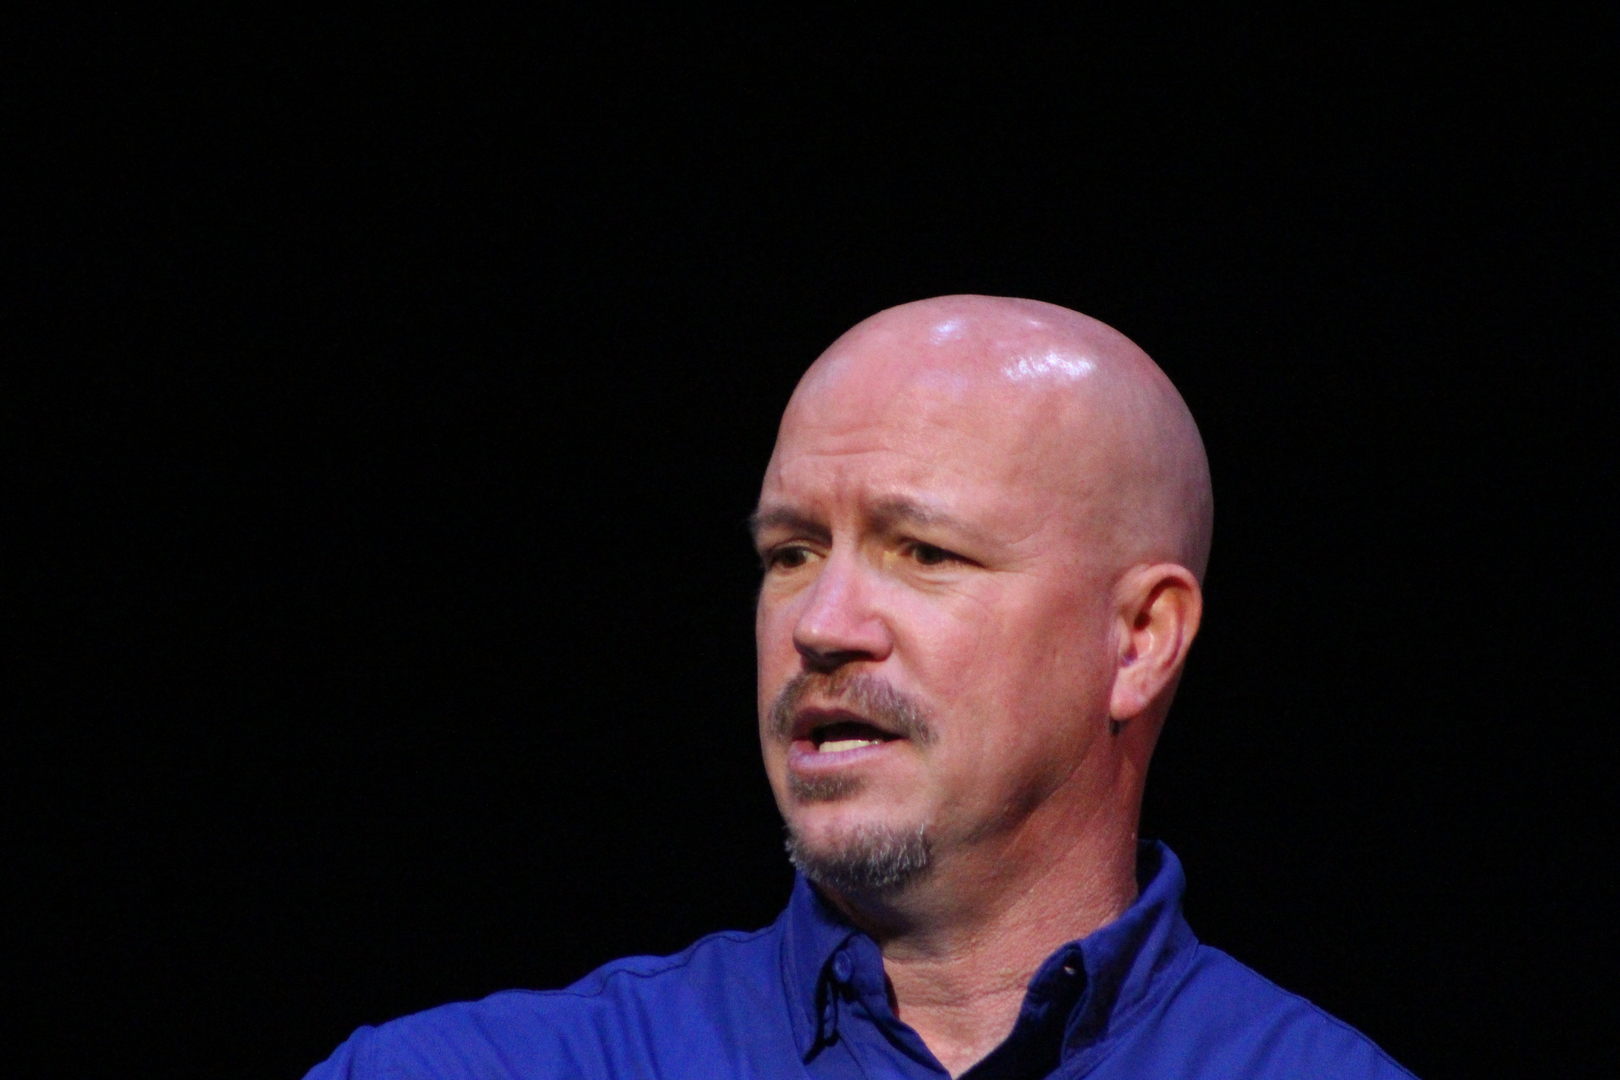 A bald man in a blue shirt speaking into a microphone.